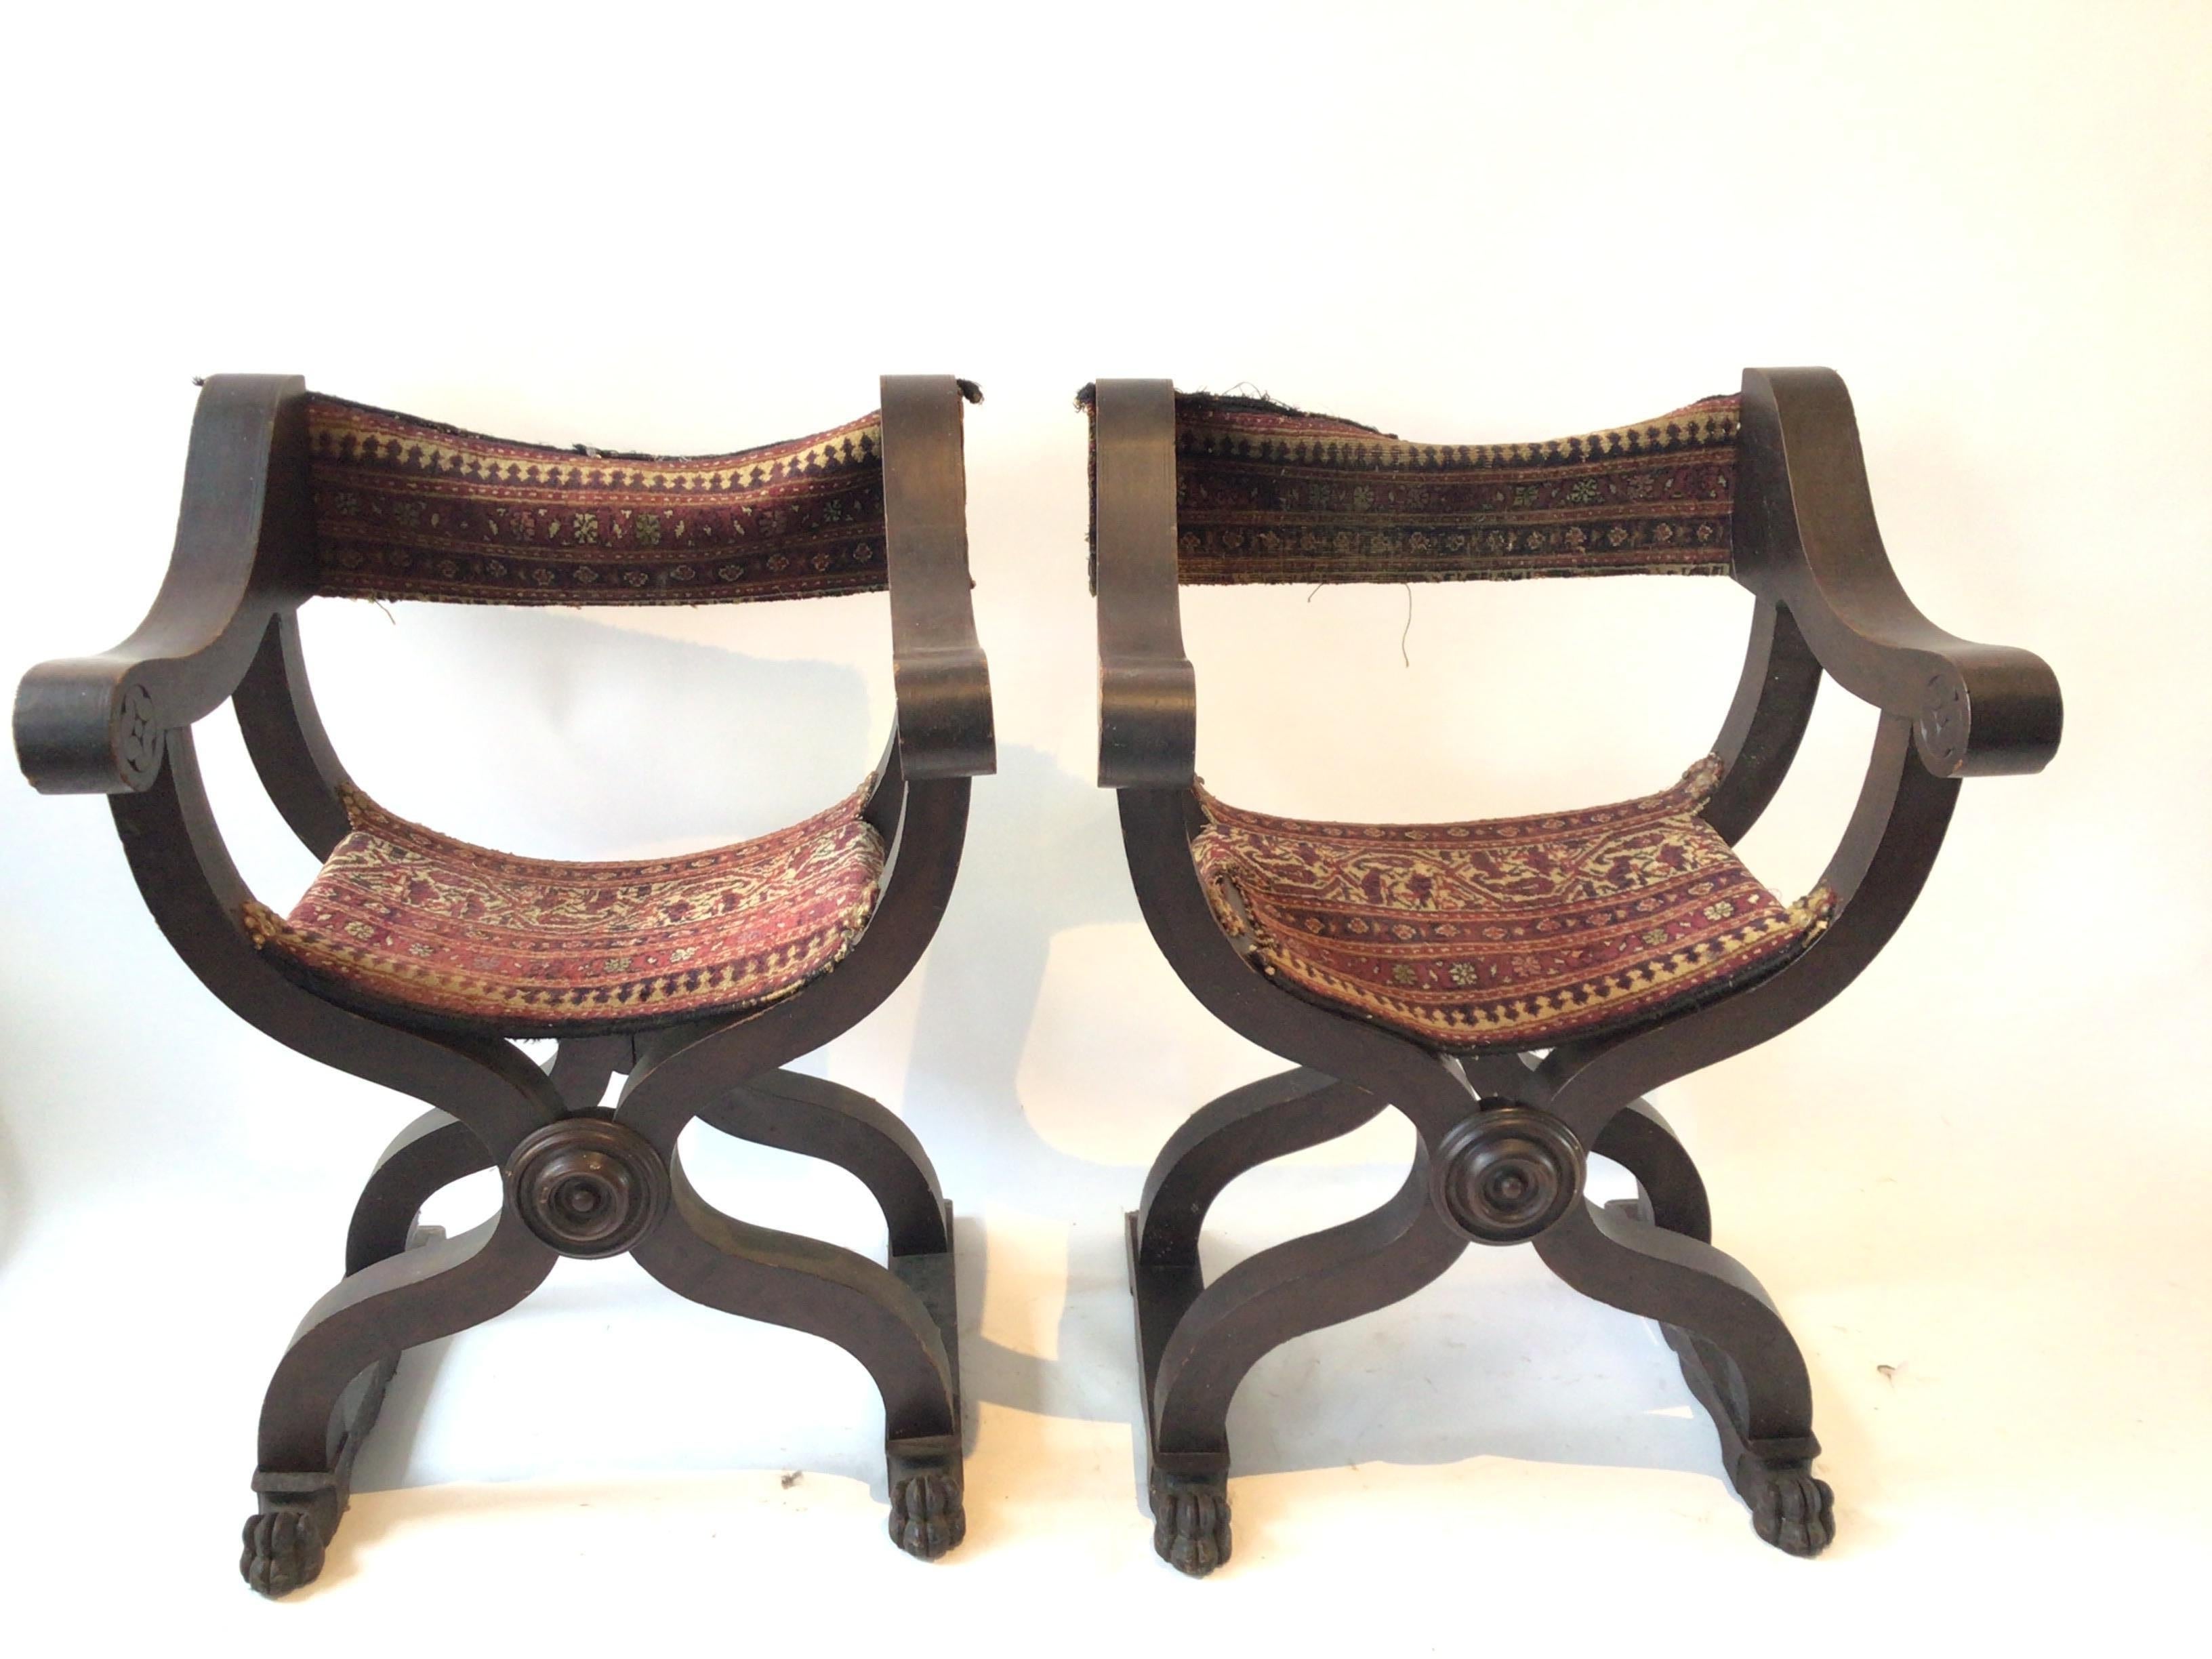 Pair of 1920s Savonarola chairs in carved wood frames with lion paws. Needs reupholstering.